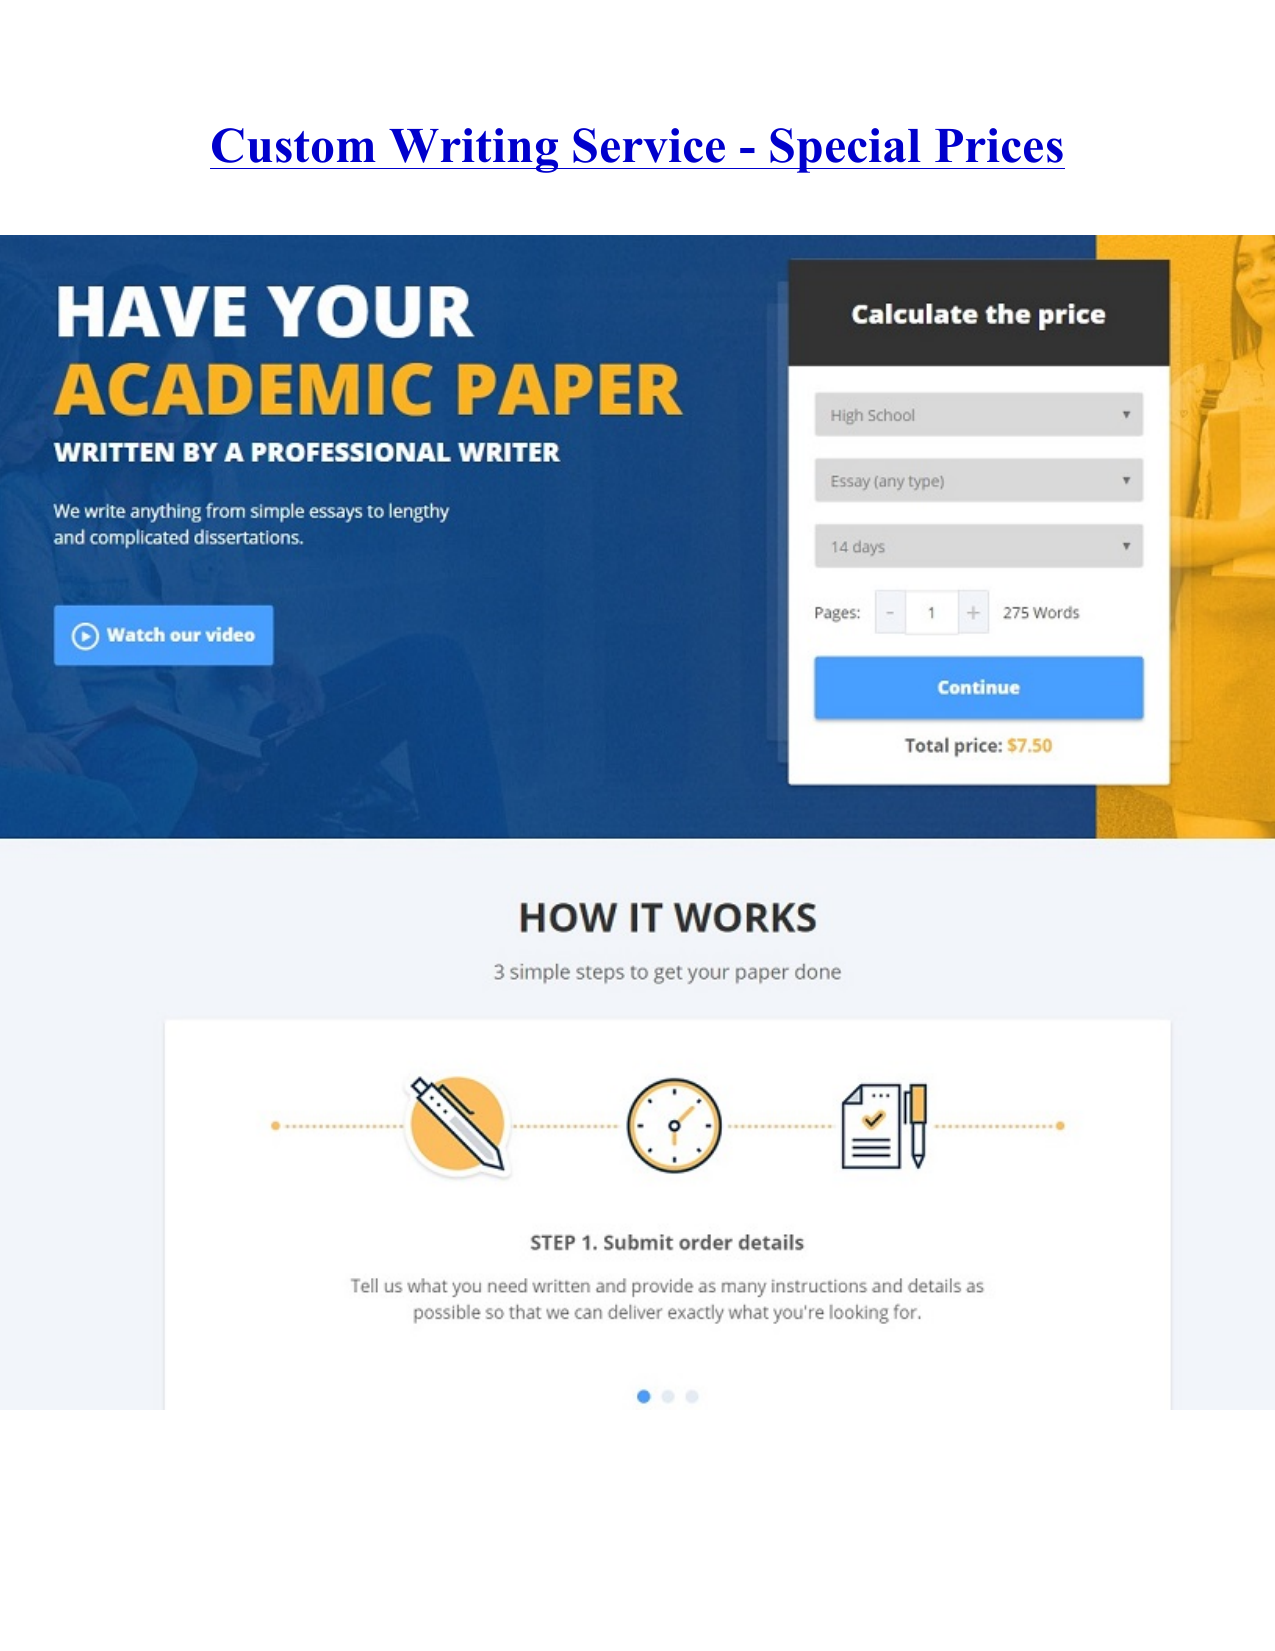 mba assignment maker